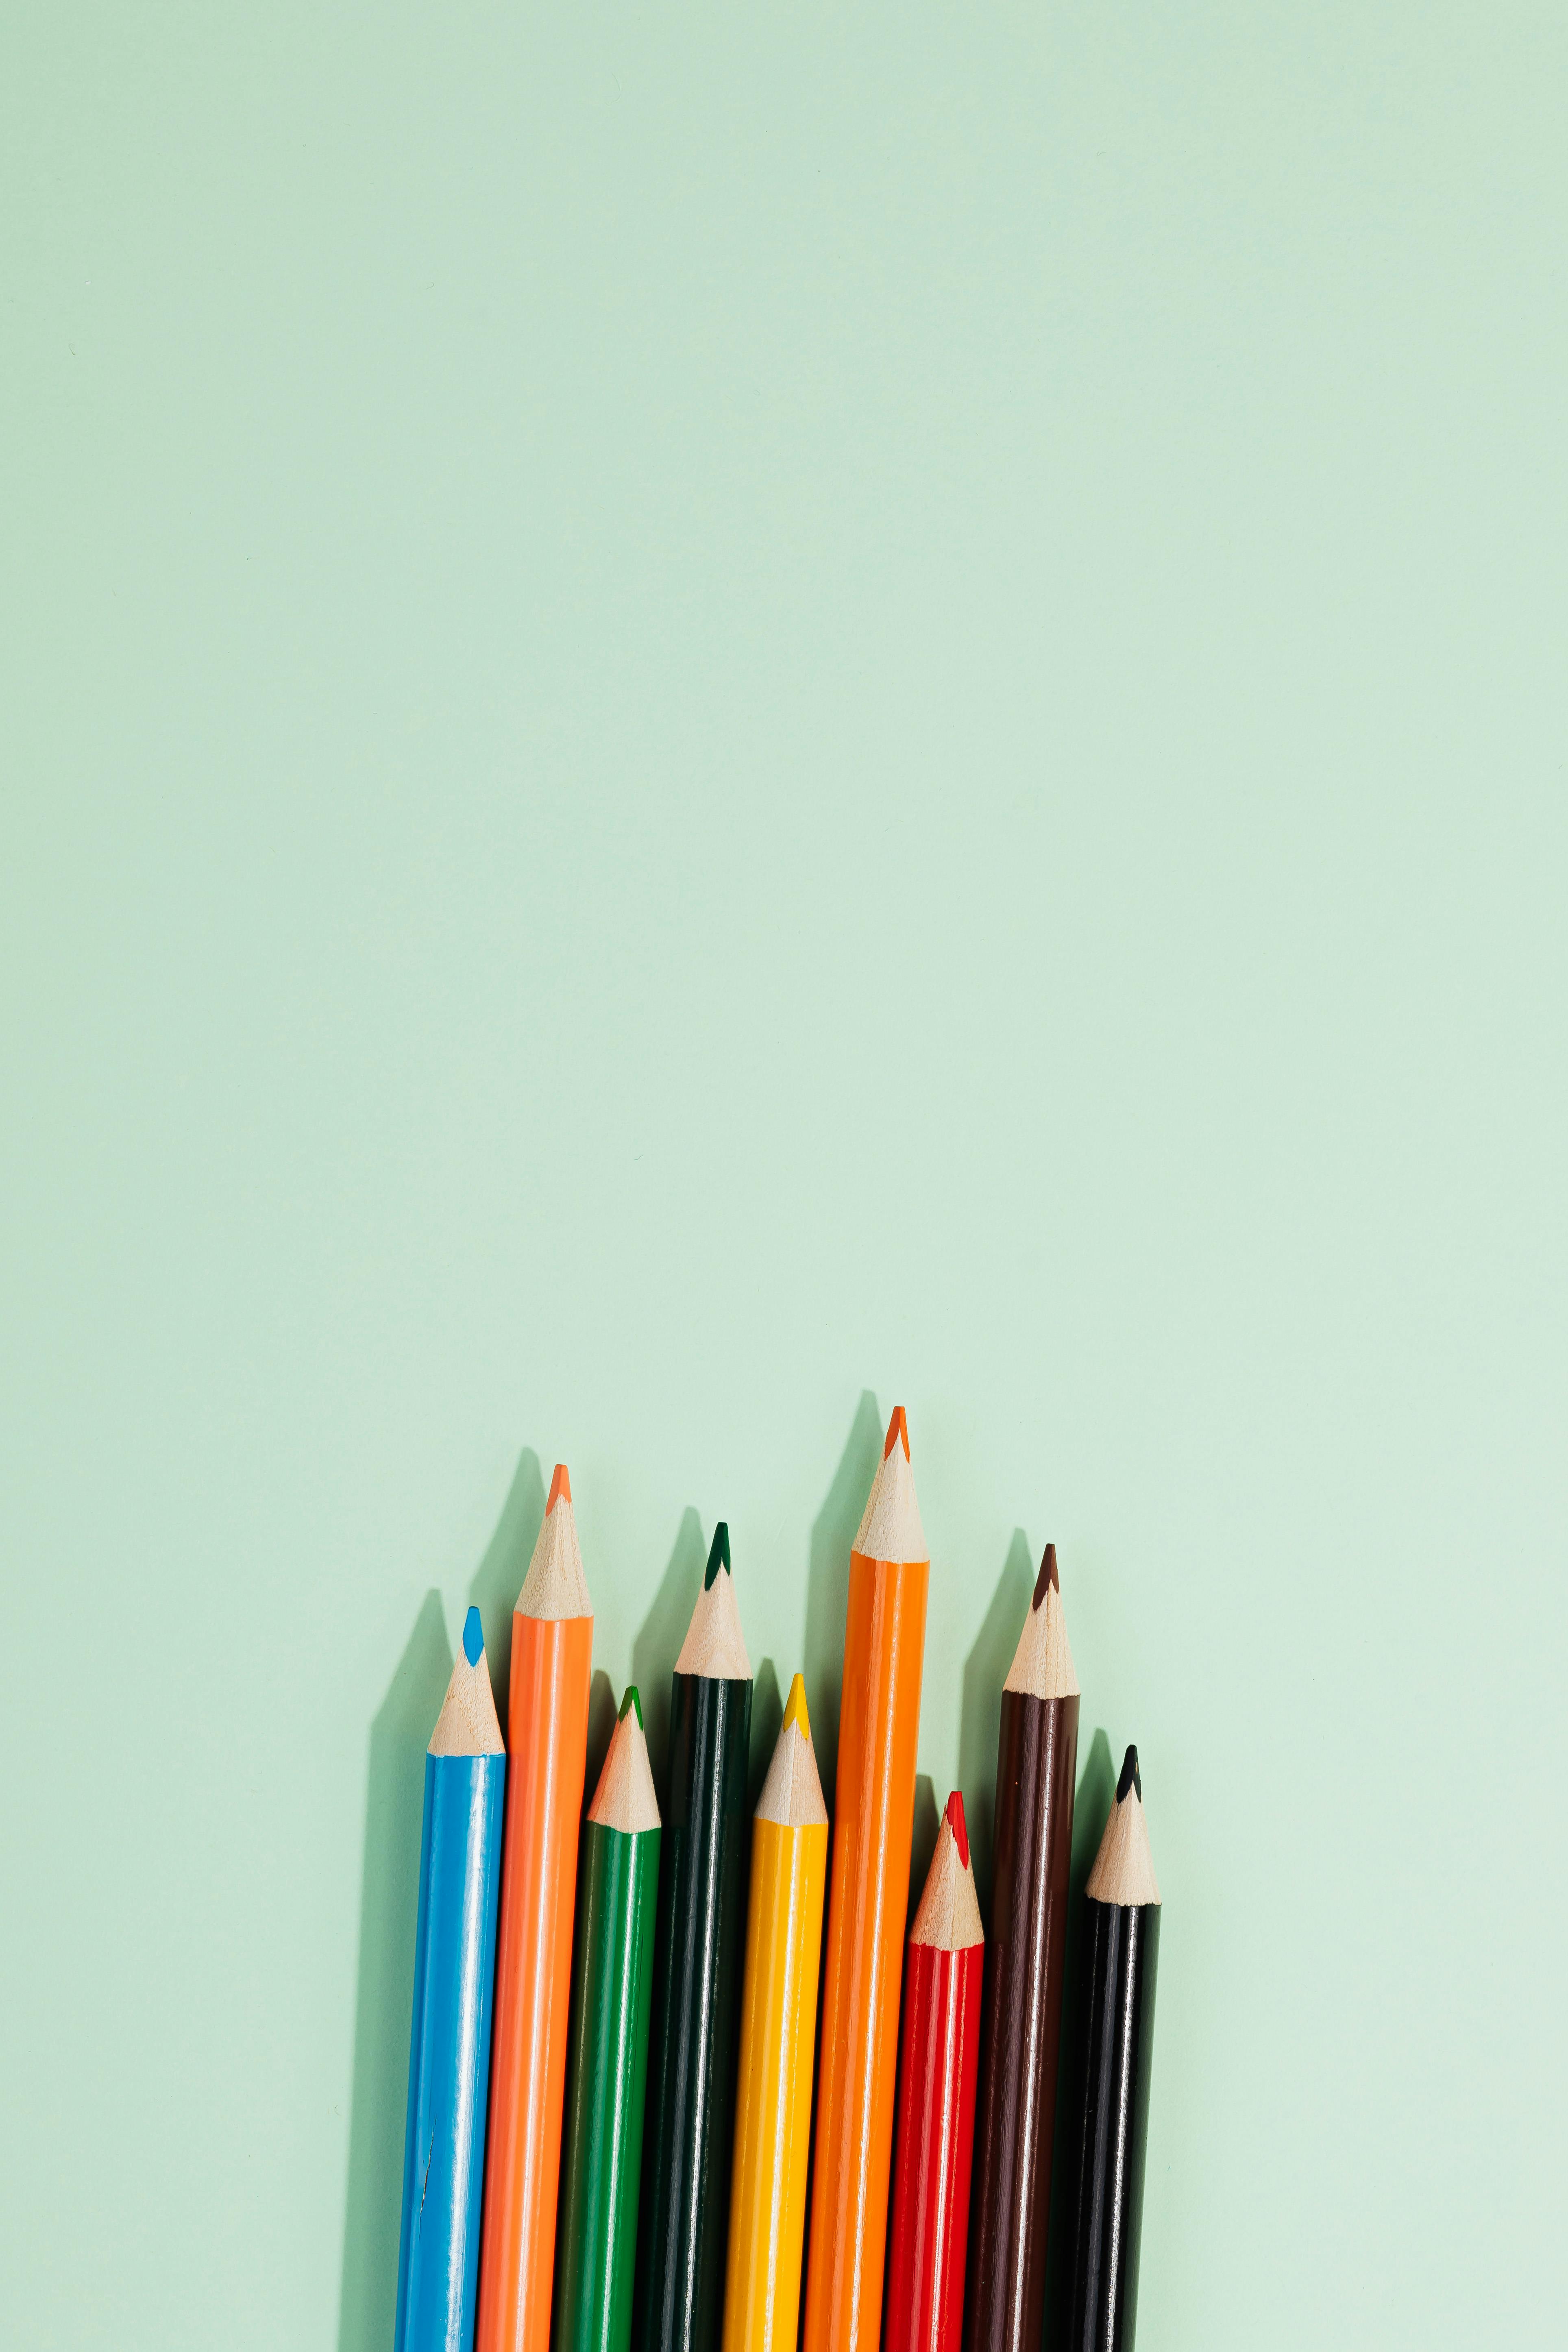 Multi Colored Pencils on Light Green Background · Free Stock Photo